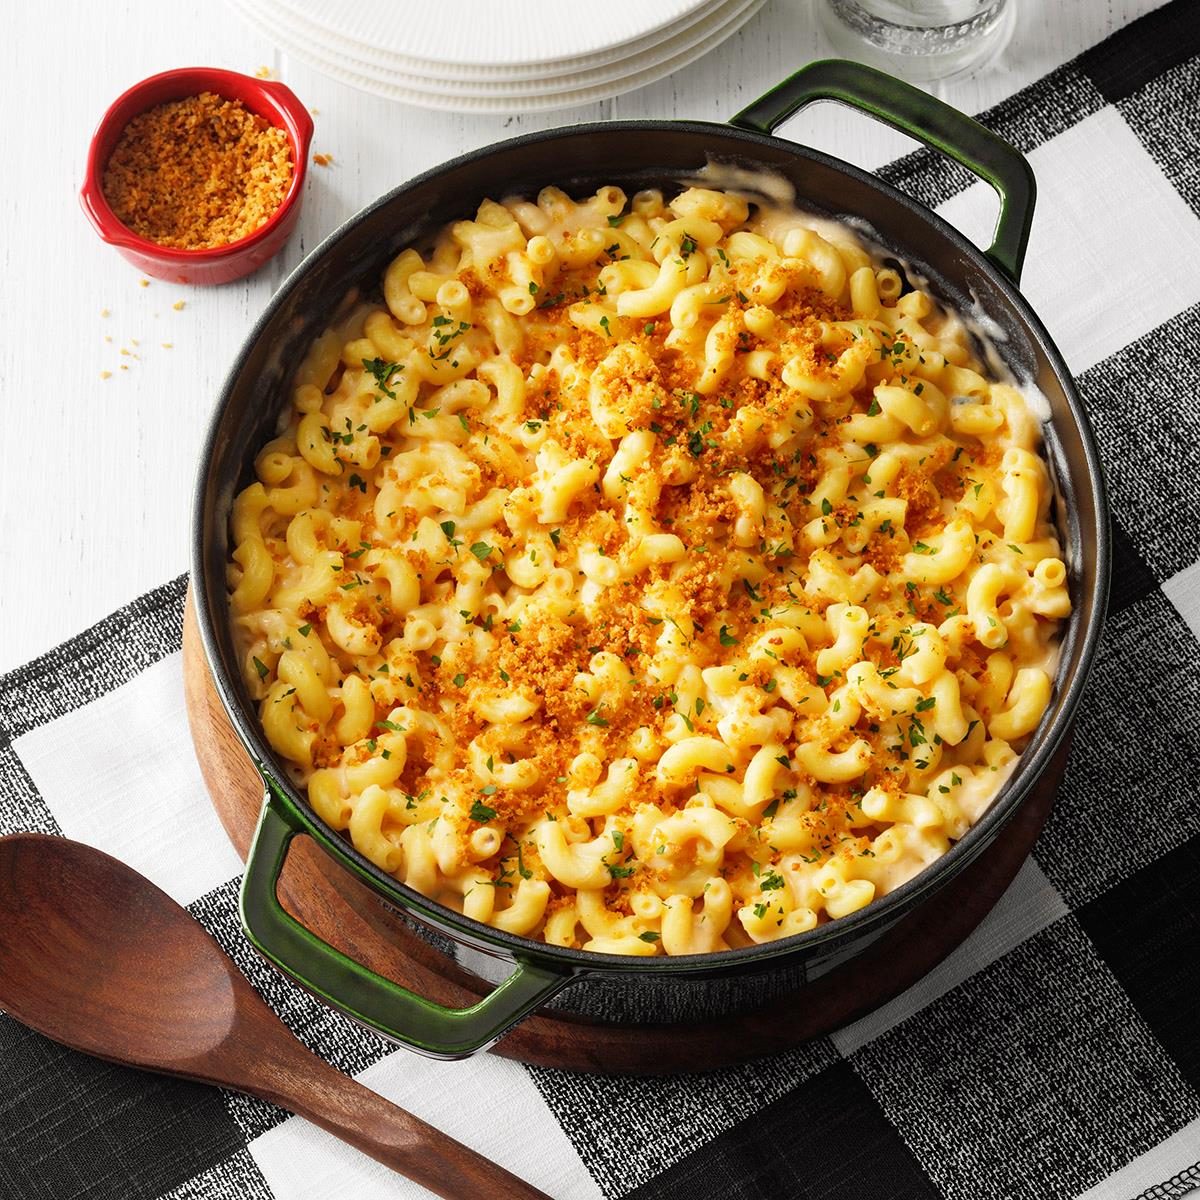 Slow-Cooker Mac and Cheese Recipe: How to Make It